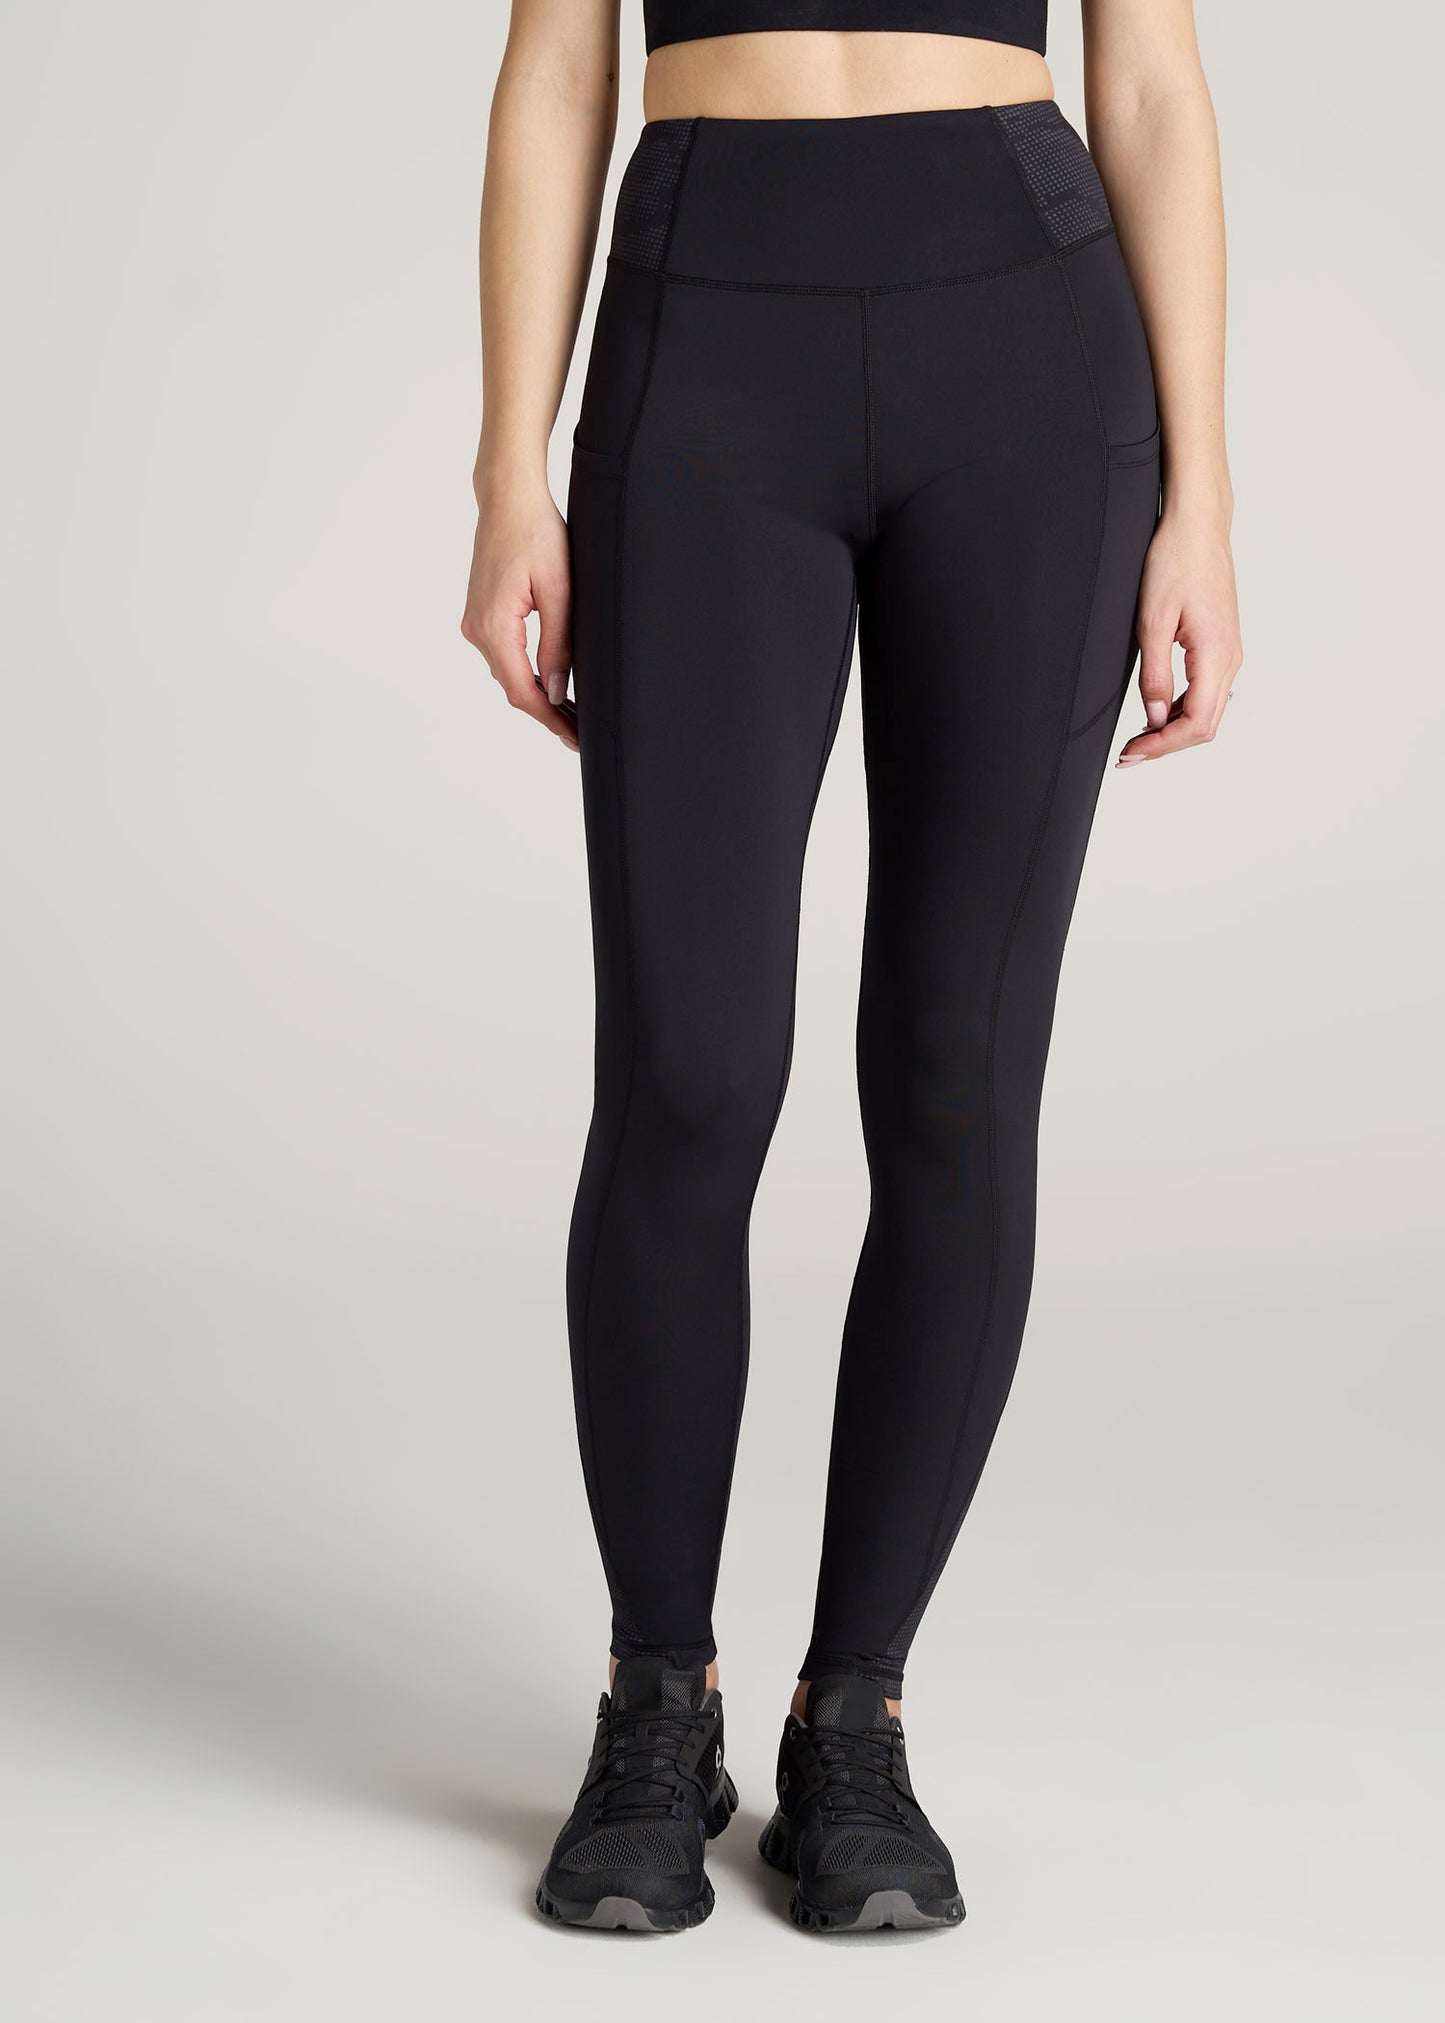 Women's Tall Reflective Active Legging With Pockets Black